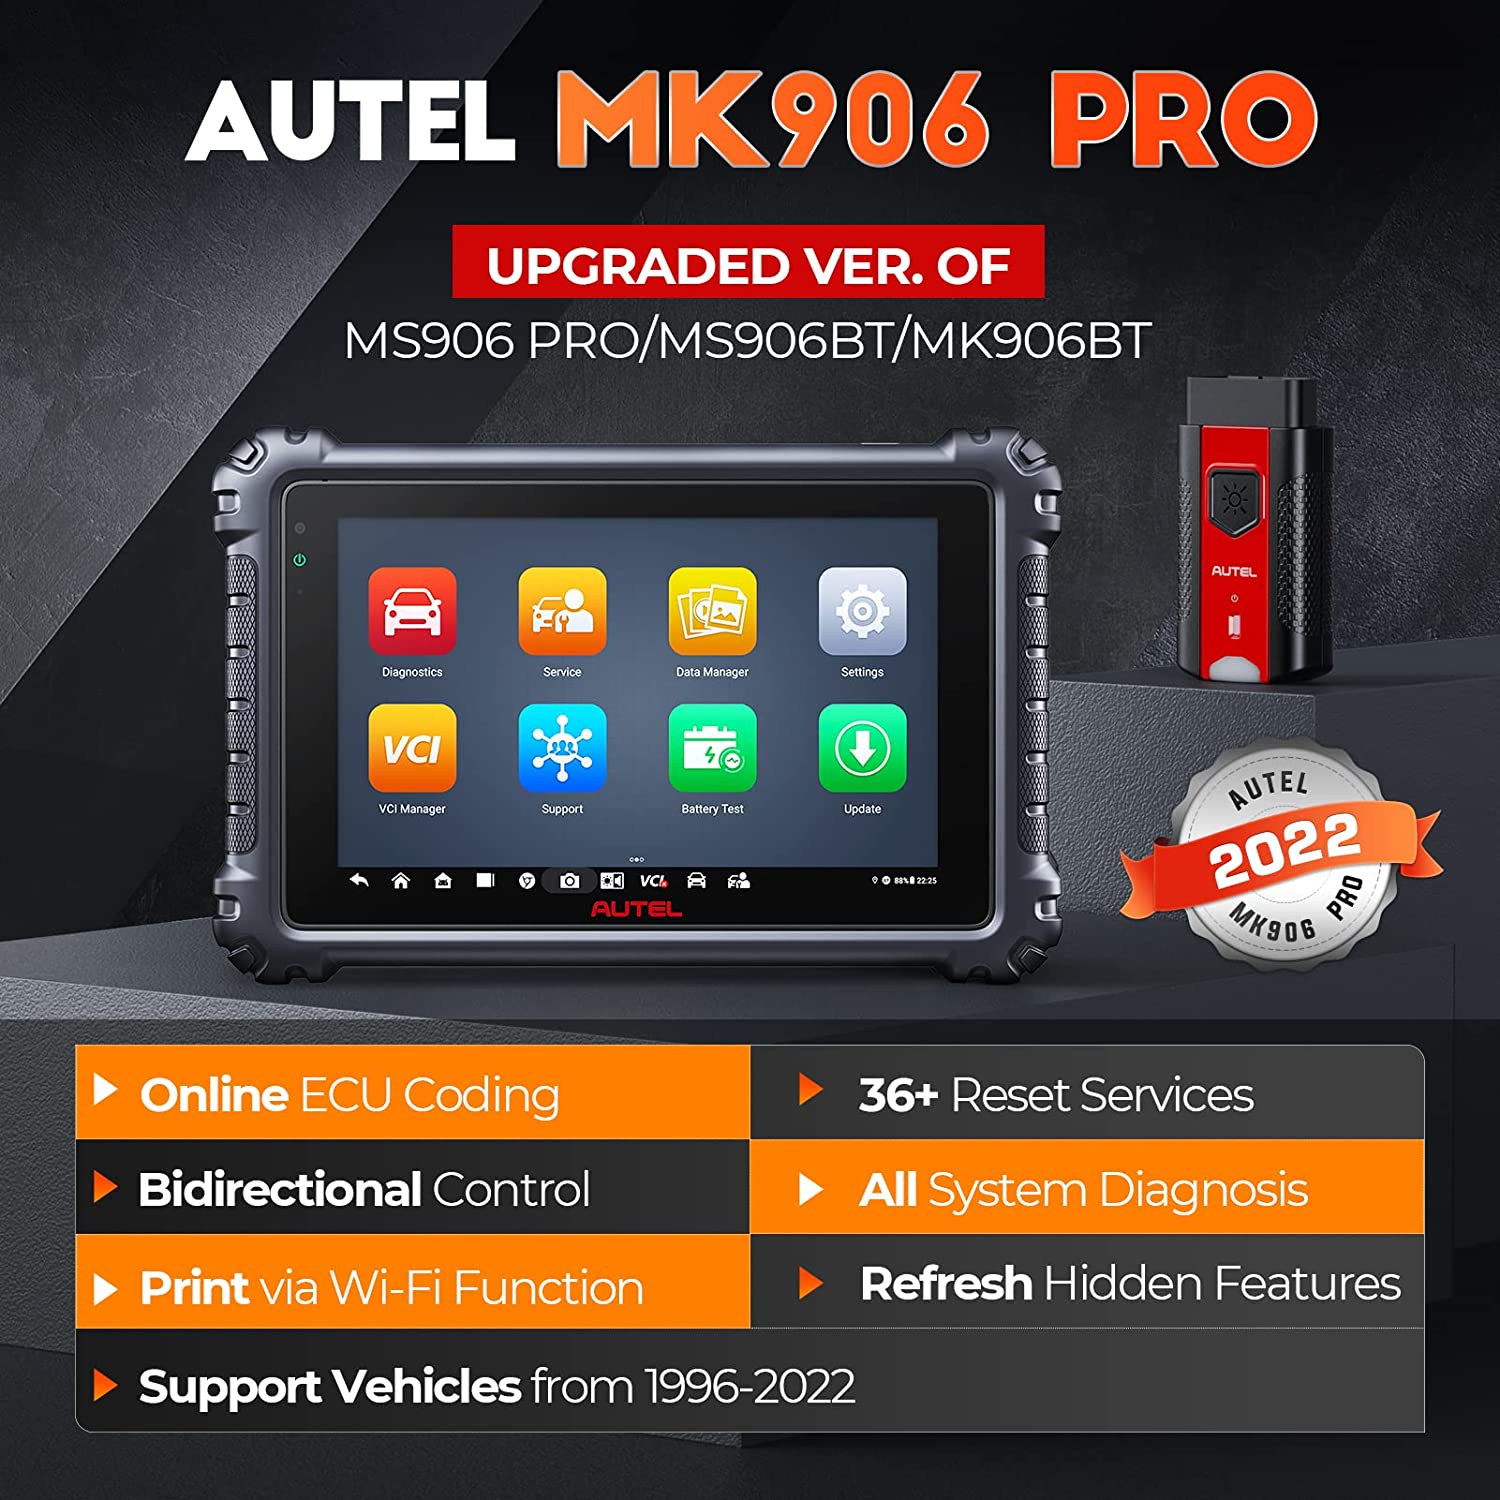 Autel MS906BT Upgrate Version MaxiCOM MK906 Pro Automative Dignostic Scanner Tool For Professional Vehicle Mechanic and DIY Enthusiast